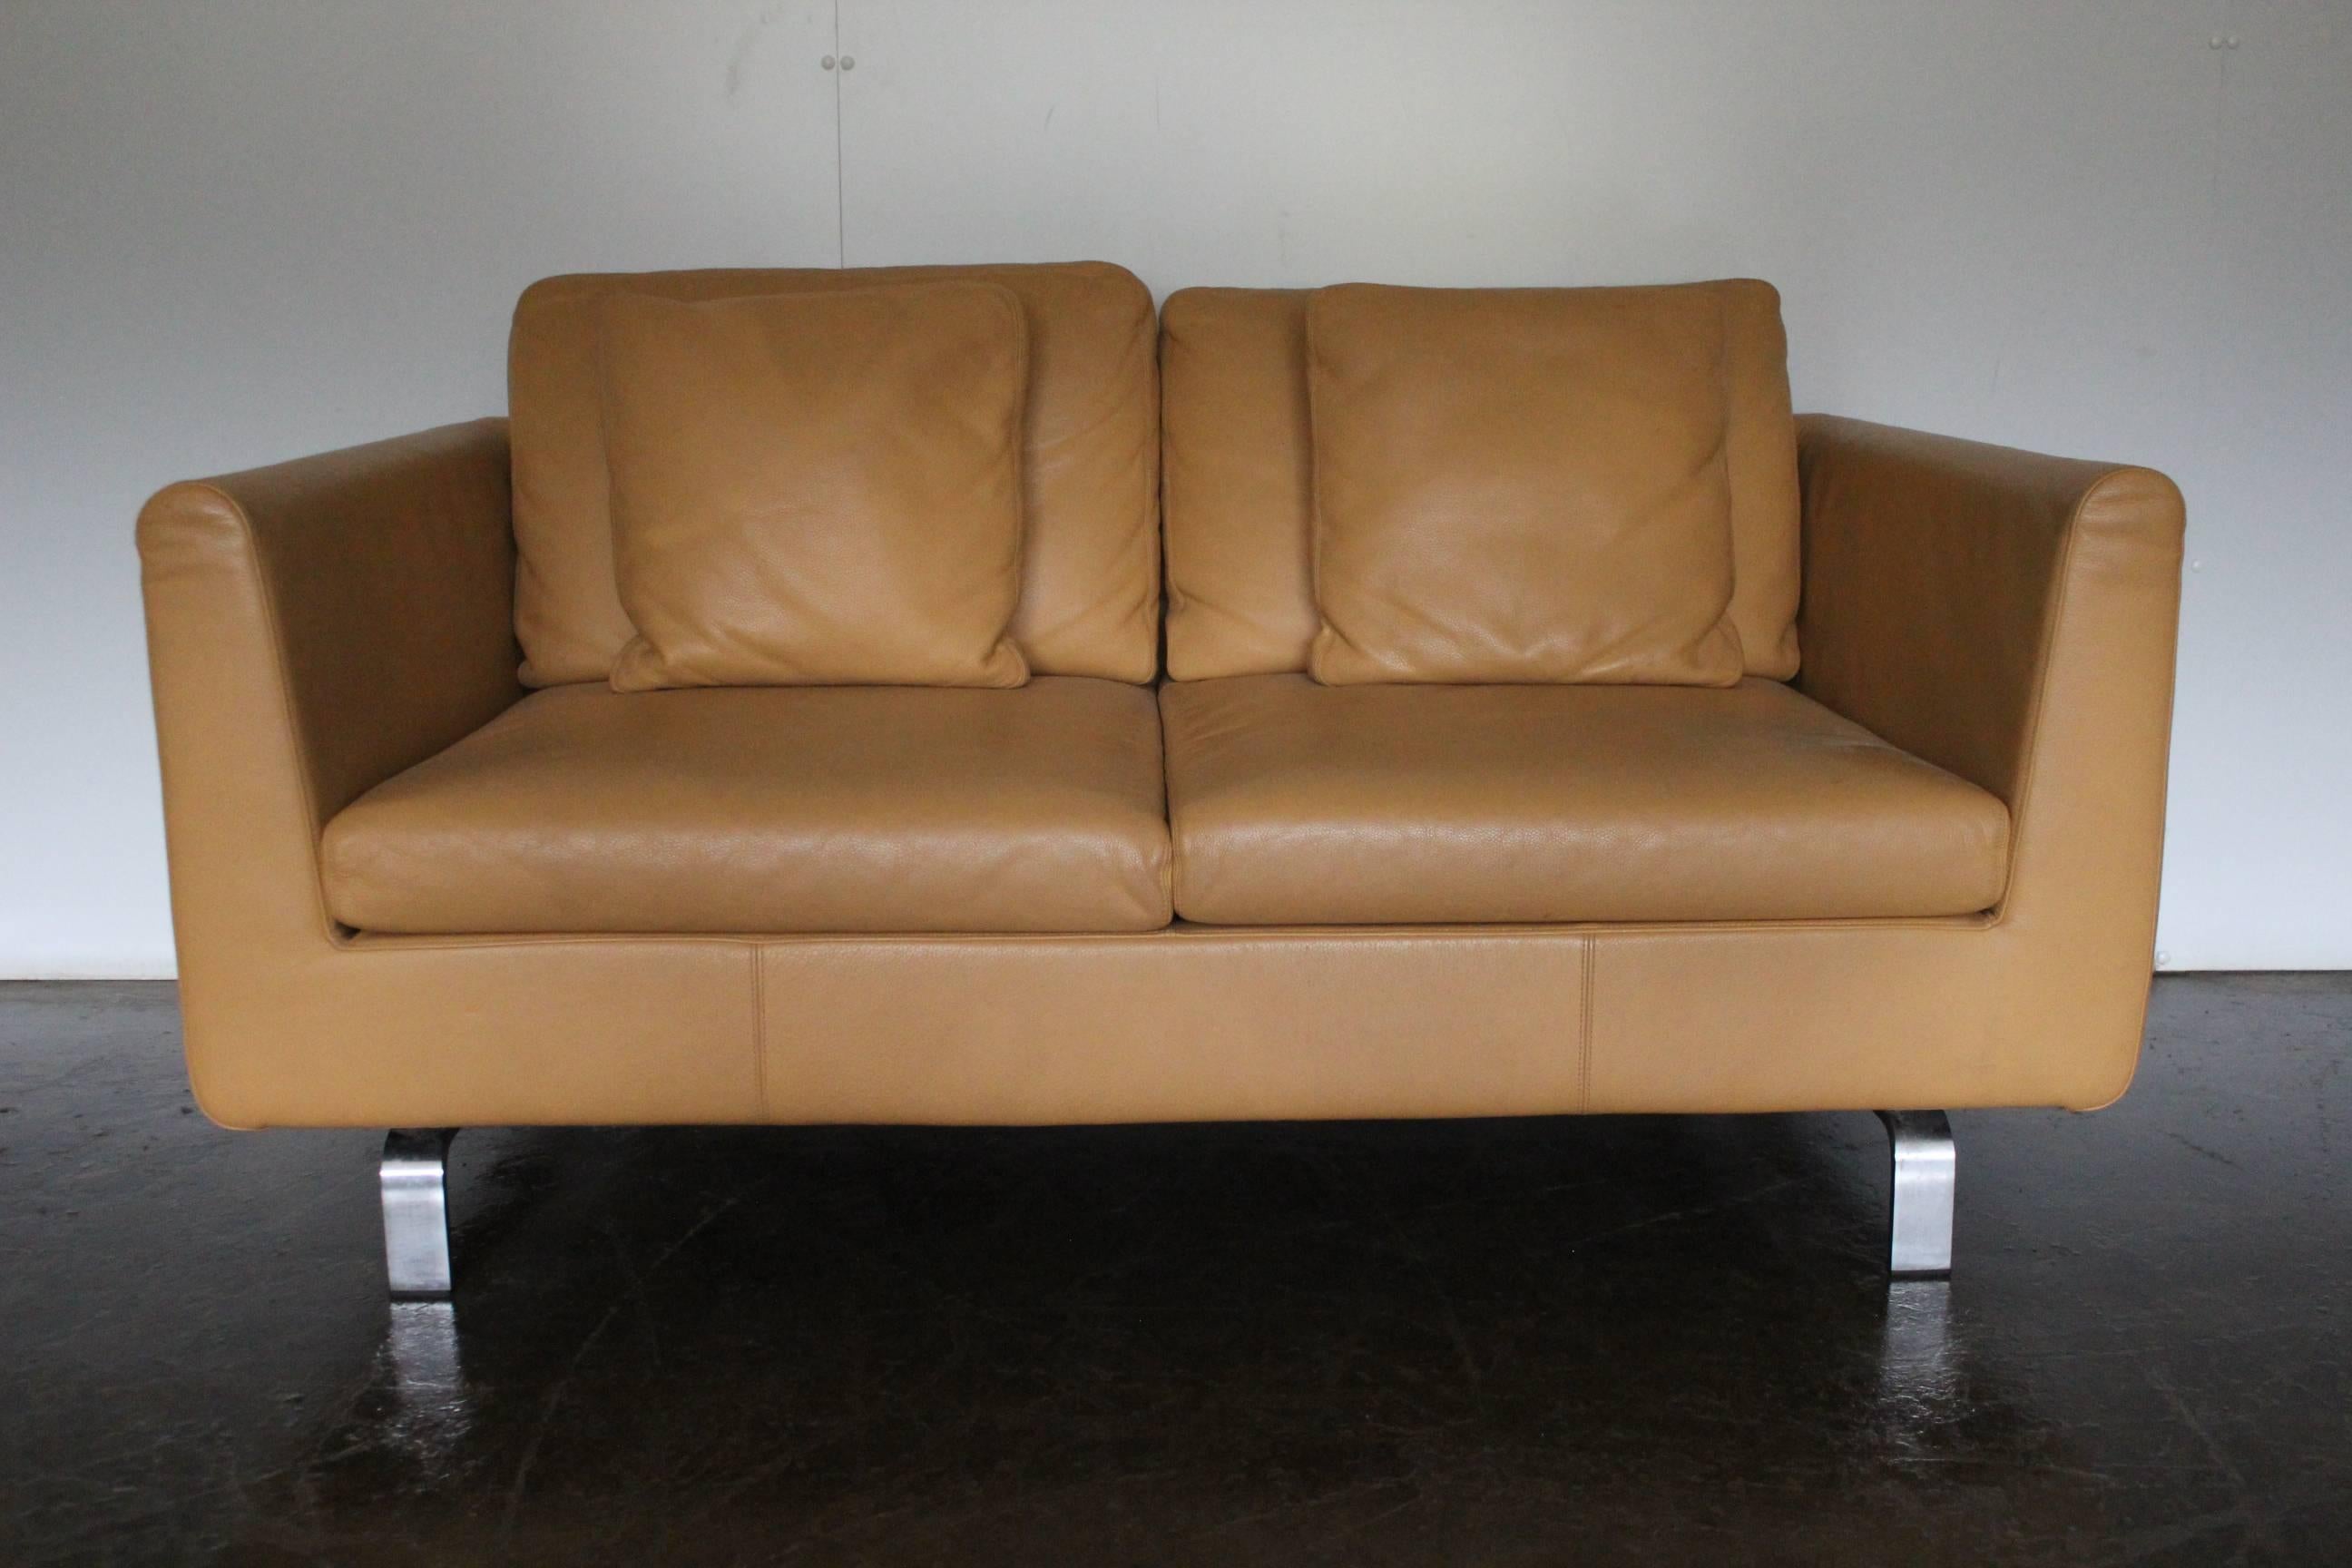 On offer on this occasion is a rare, pristine pair of two-seat sofas, from the world renown German furniture house of Walter Knoll, dressed in a sublime matt Pale-Tan leather, and with Matt Polished-Steel framework.

As you will no doubt be aware